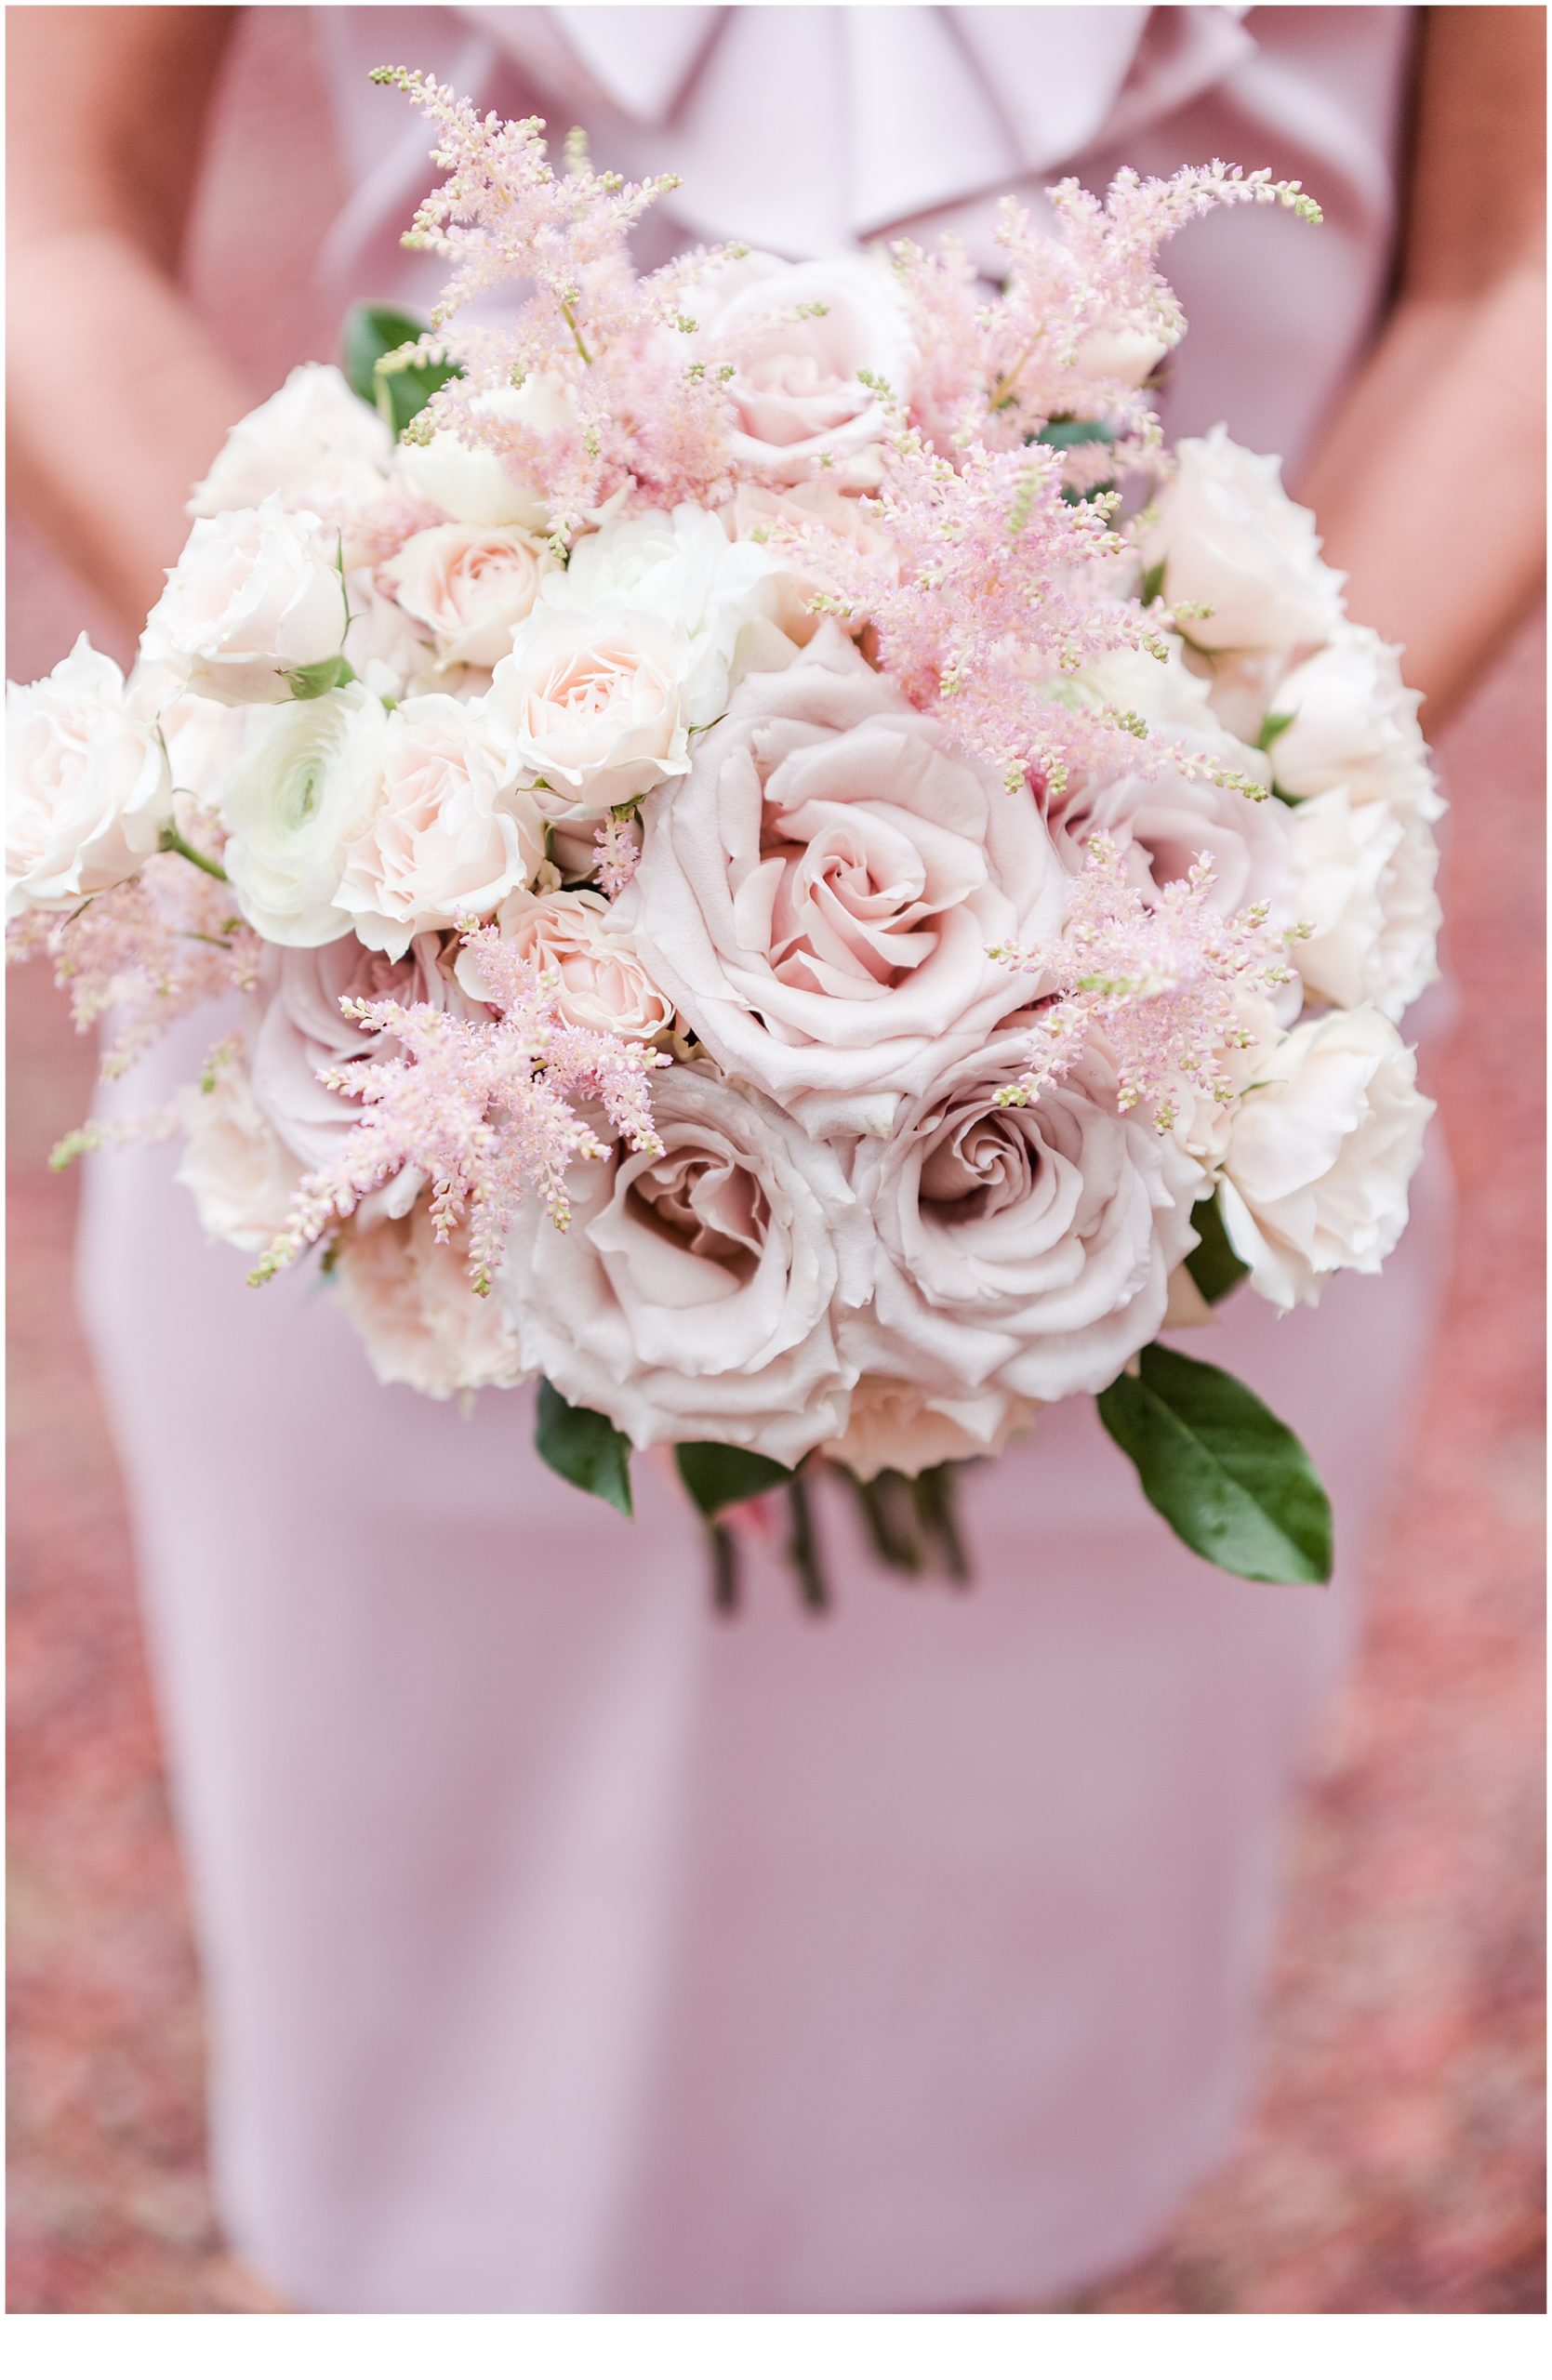 Pink and white rose bouquet.